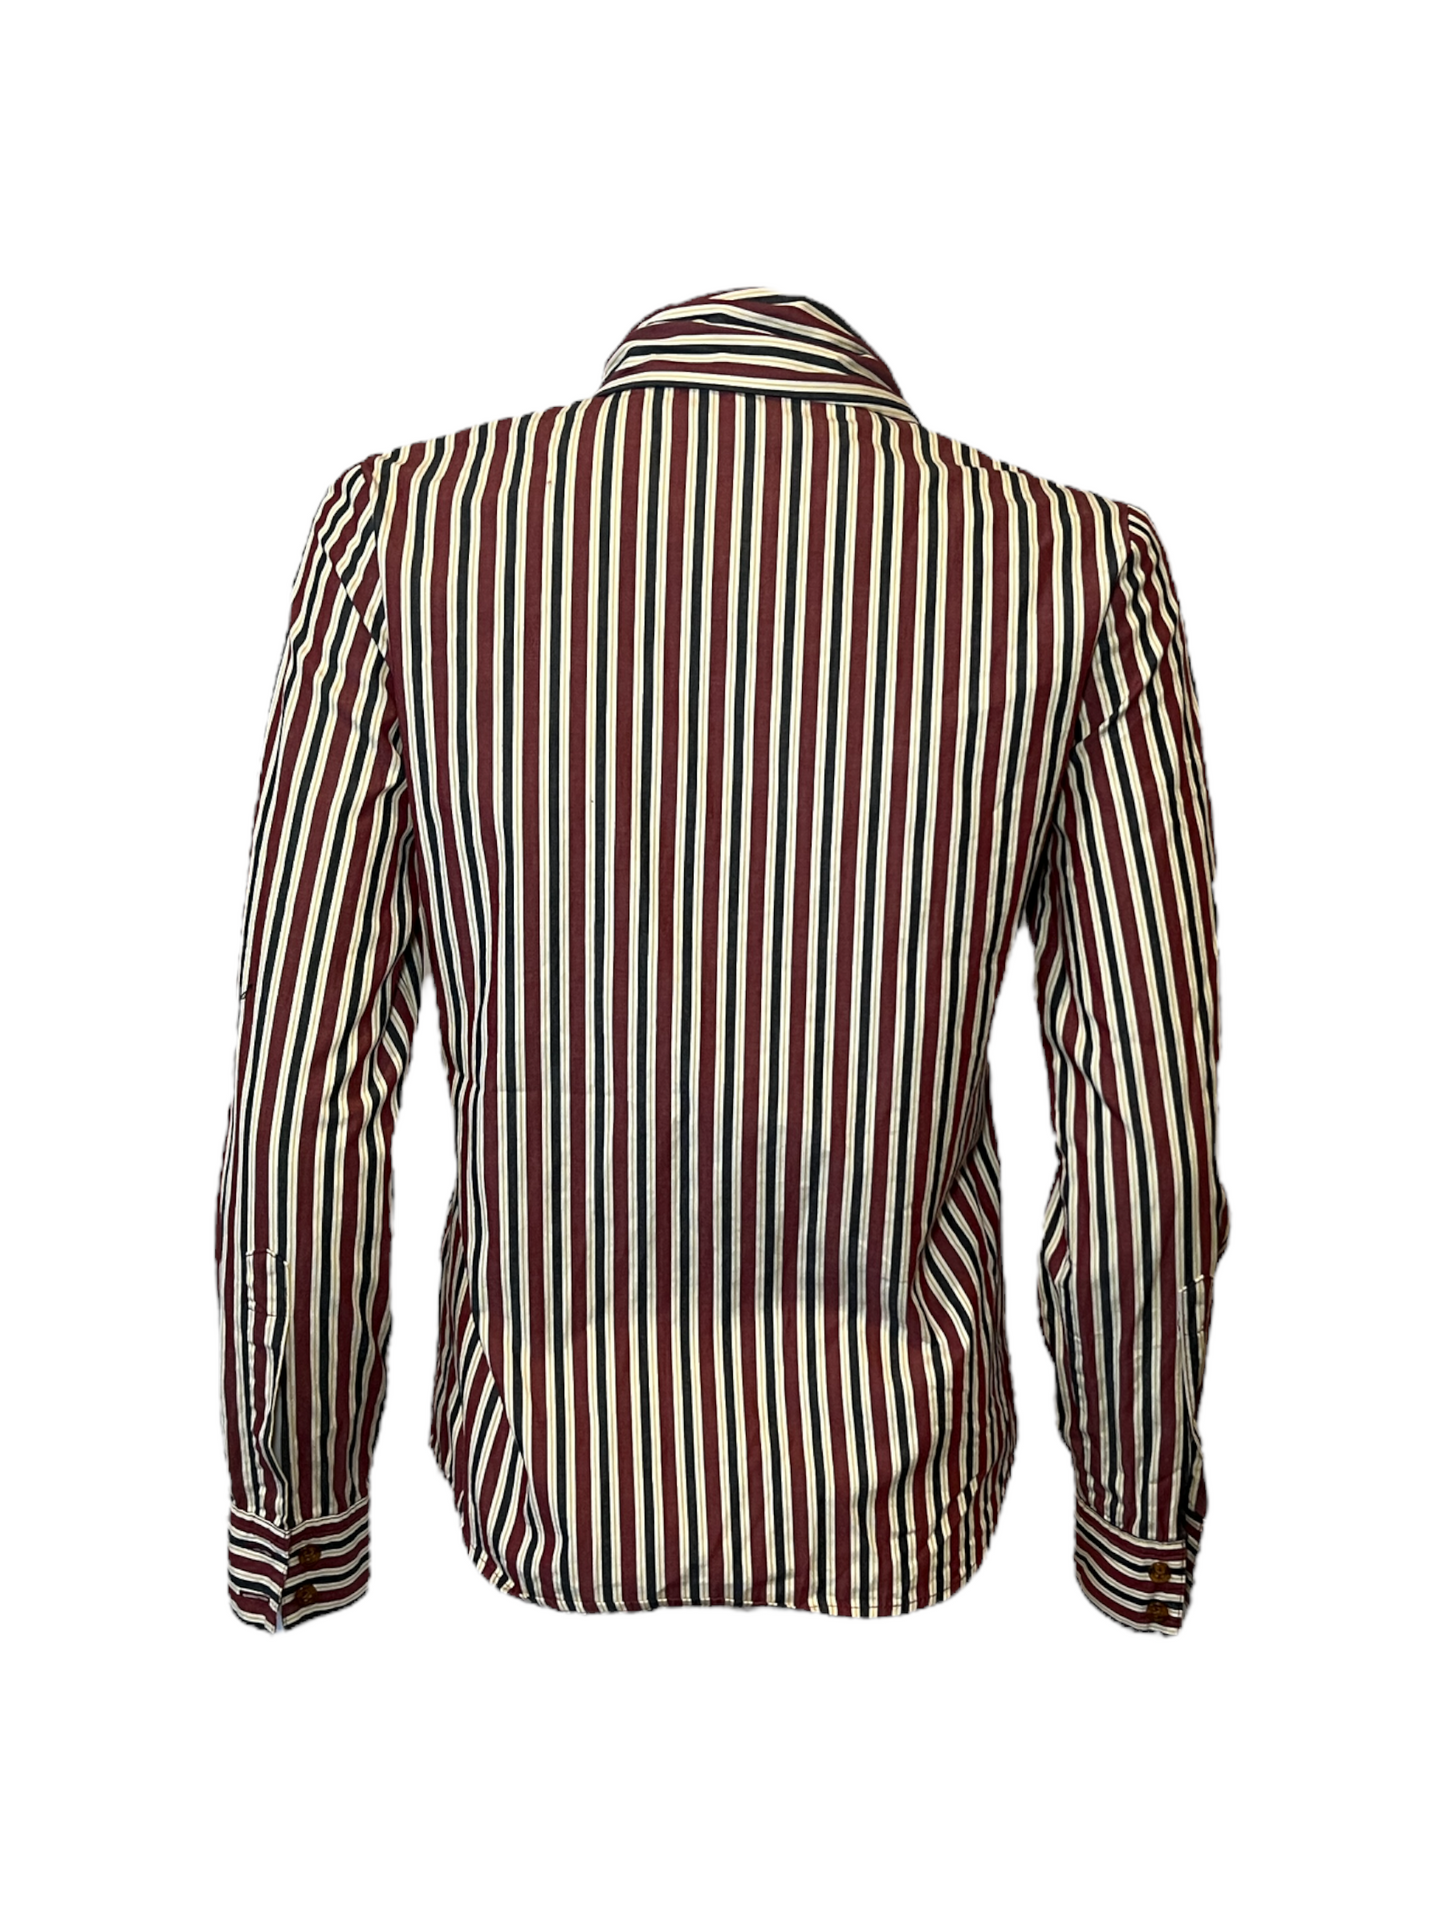 Vivienne Westwood Striped Bow Tie Collared Blouse